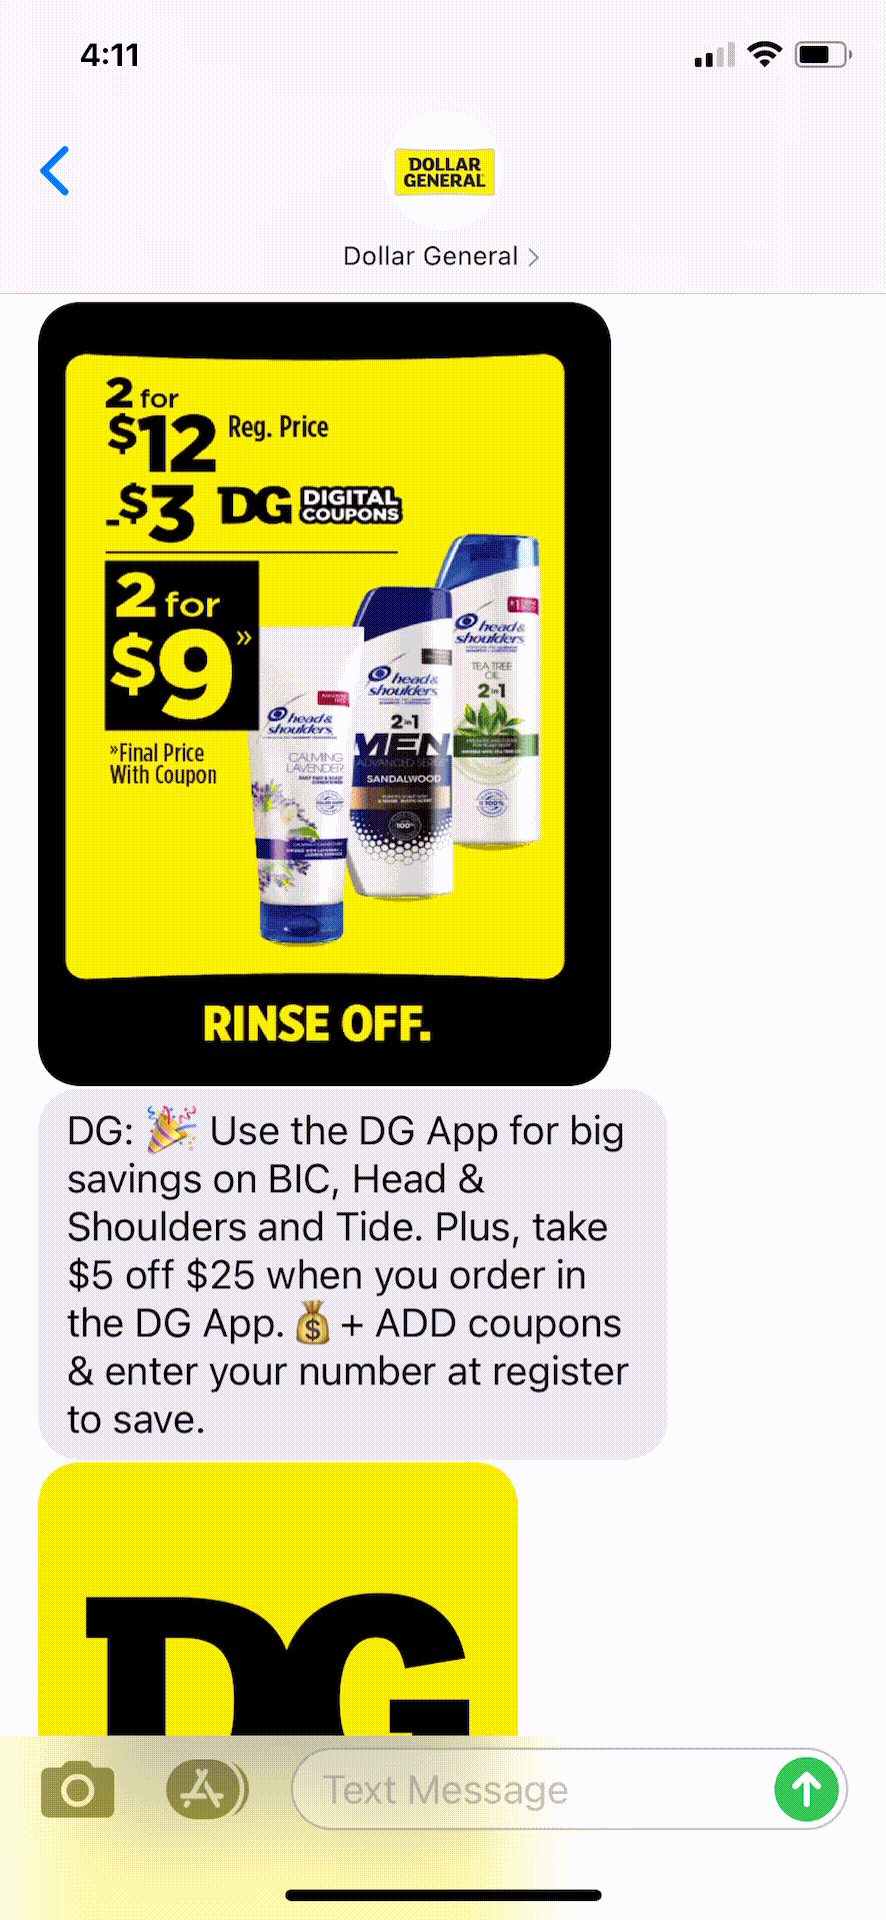 Dollar-General-Text-Message-Marketing-Example-06.05.2021